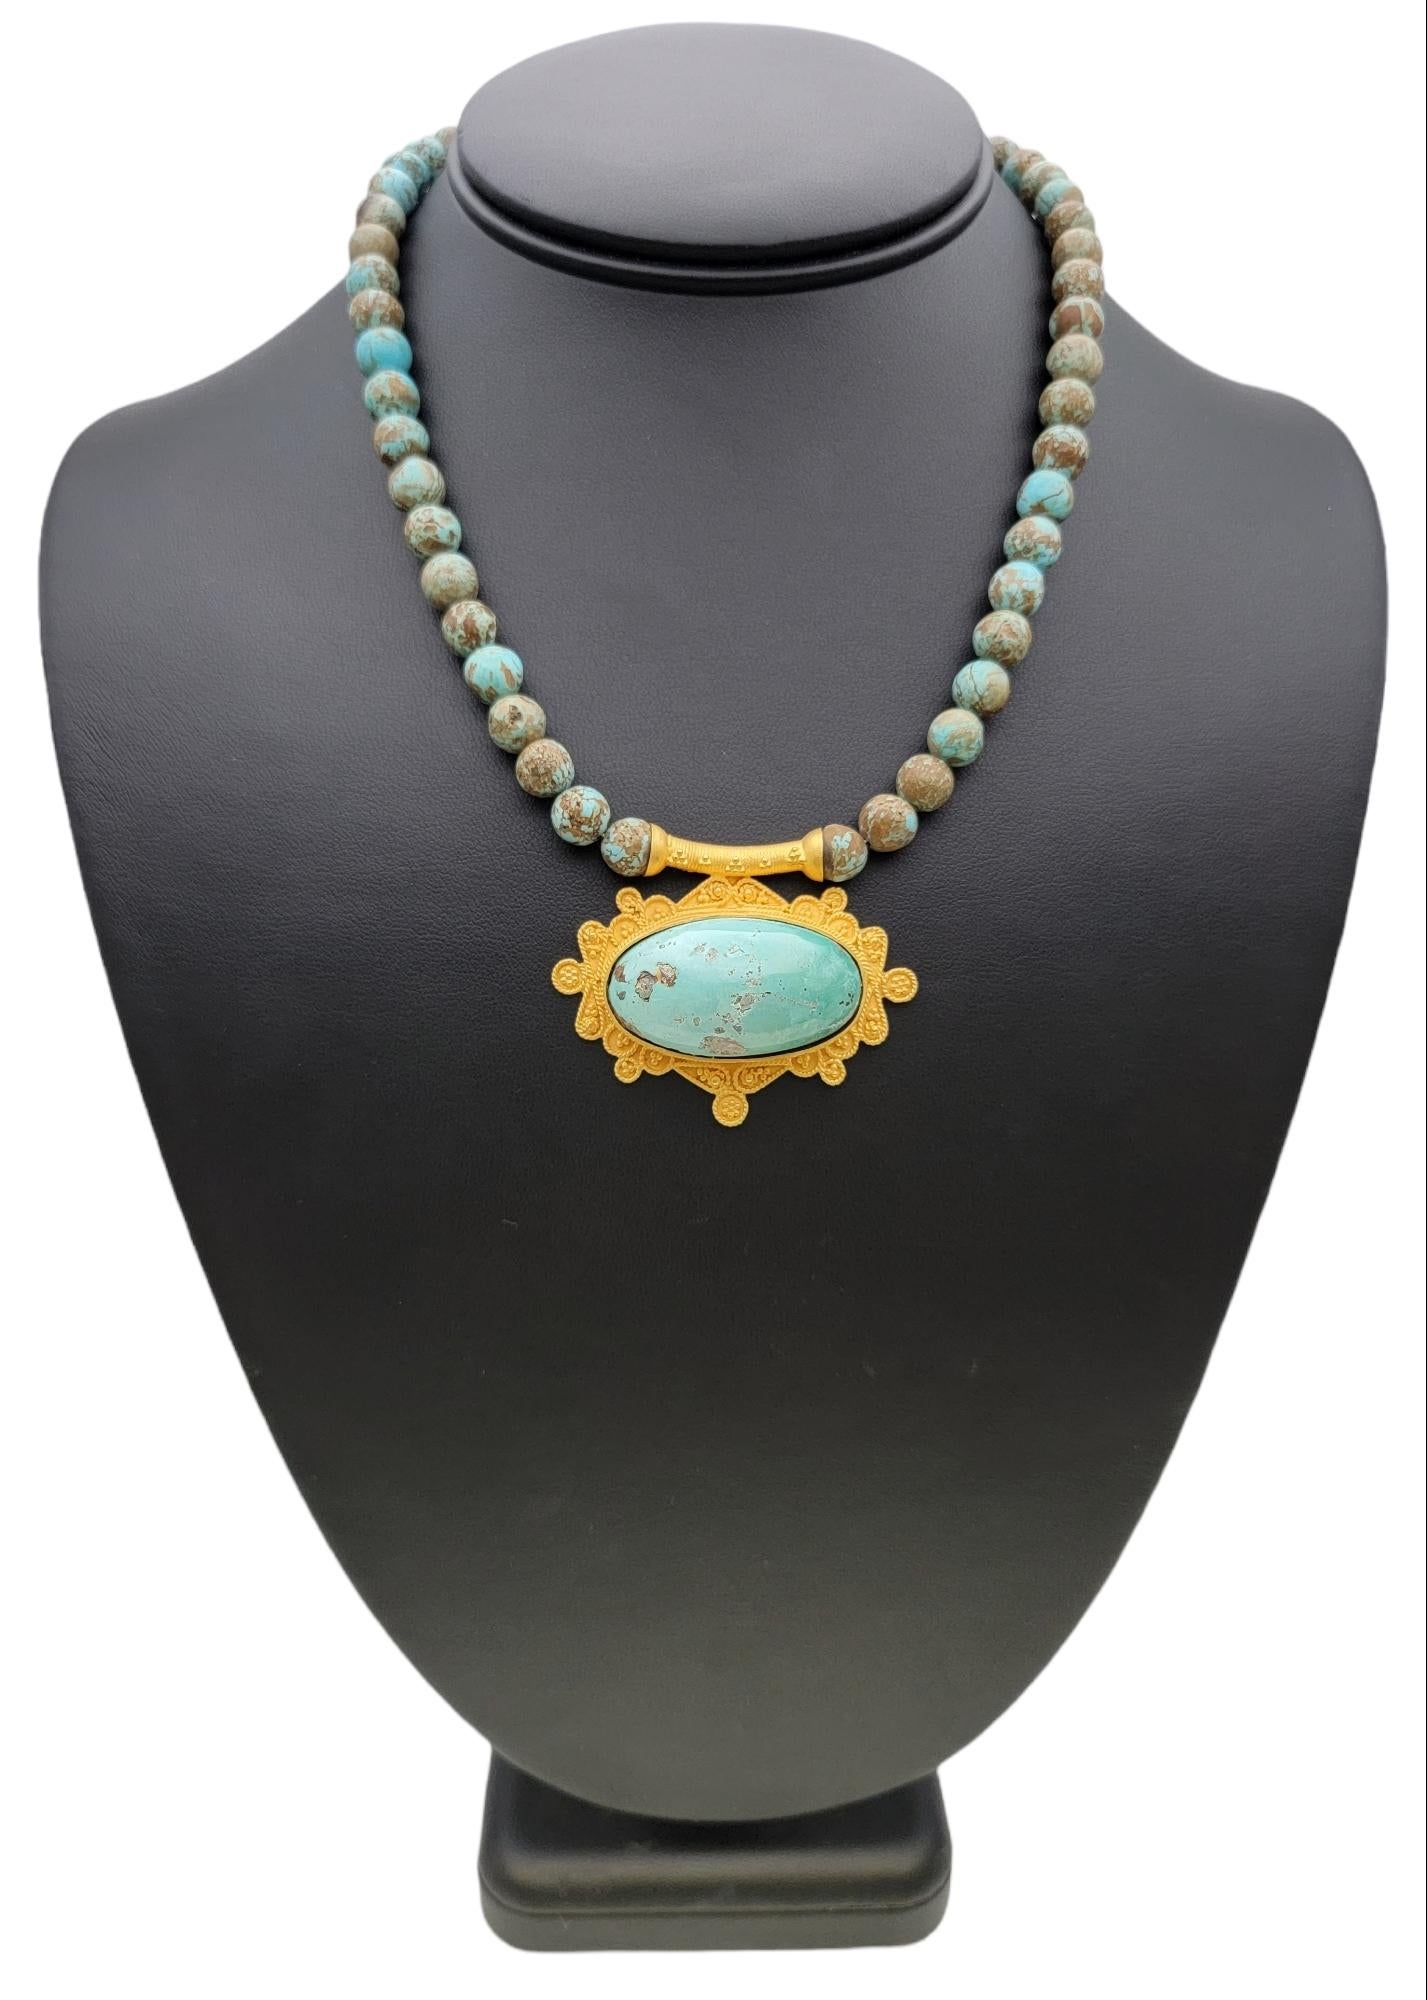 Natural Turquoise Beaded Necklace with Ornate 18 Karat Yellow Gold Pendant For Sale 5